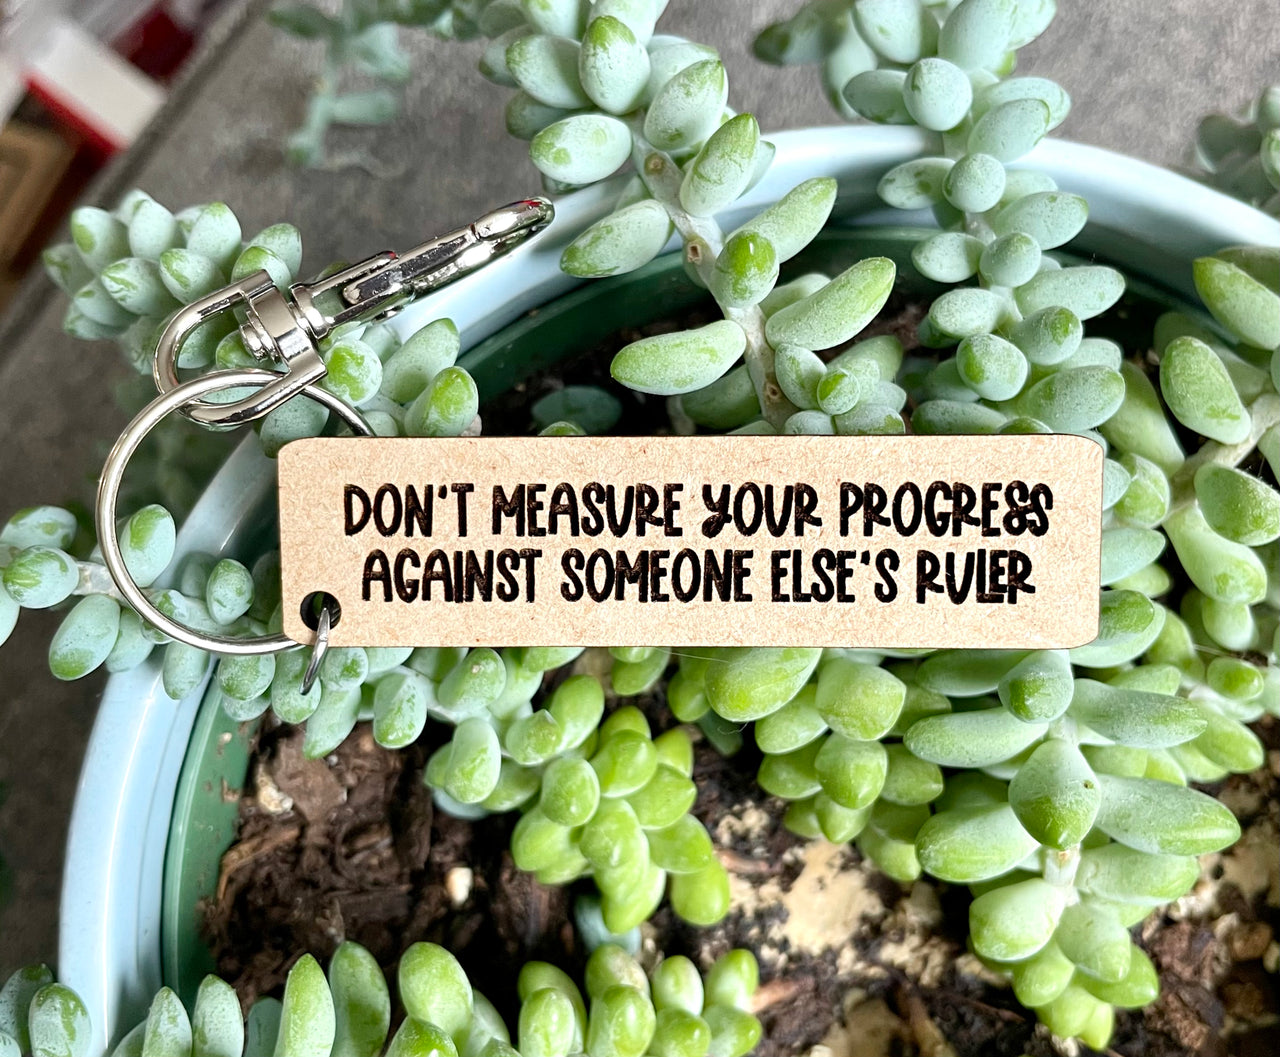 Don’t measure your progress against someone else’s ruler keychain